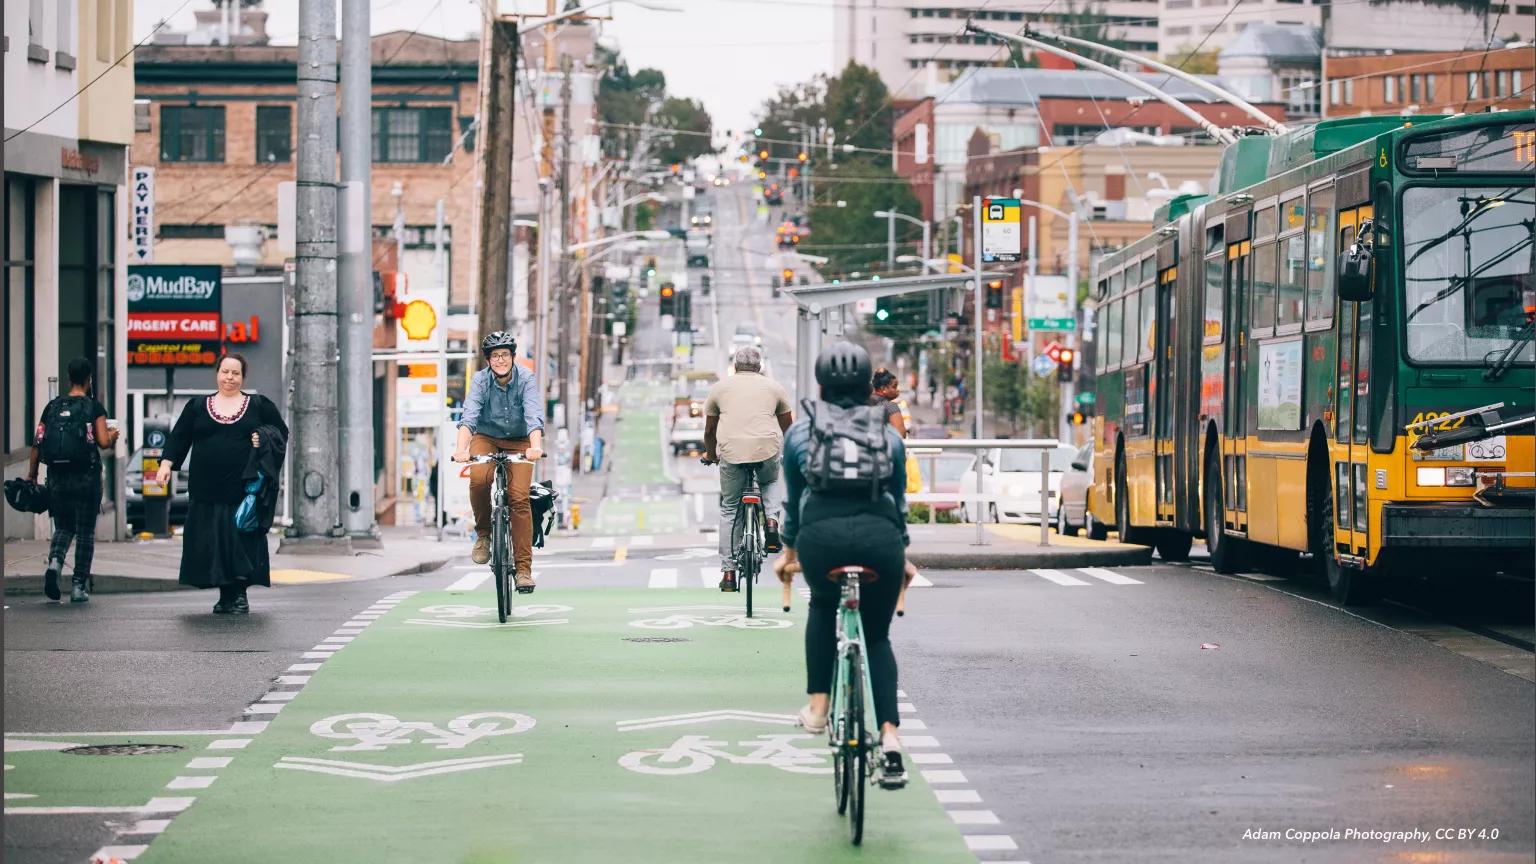 A view of cyclists on a bike lane in Seattle, Washington